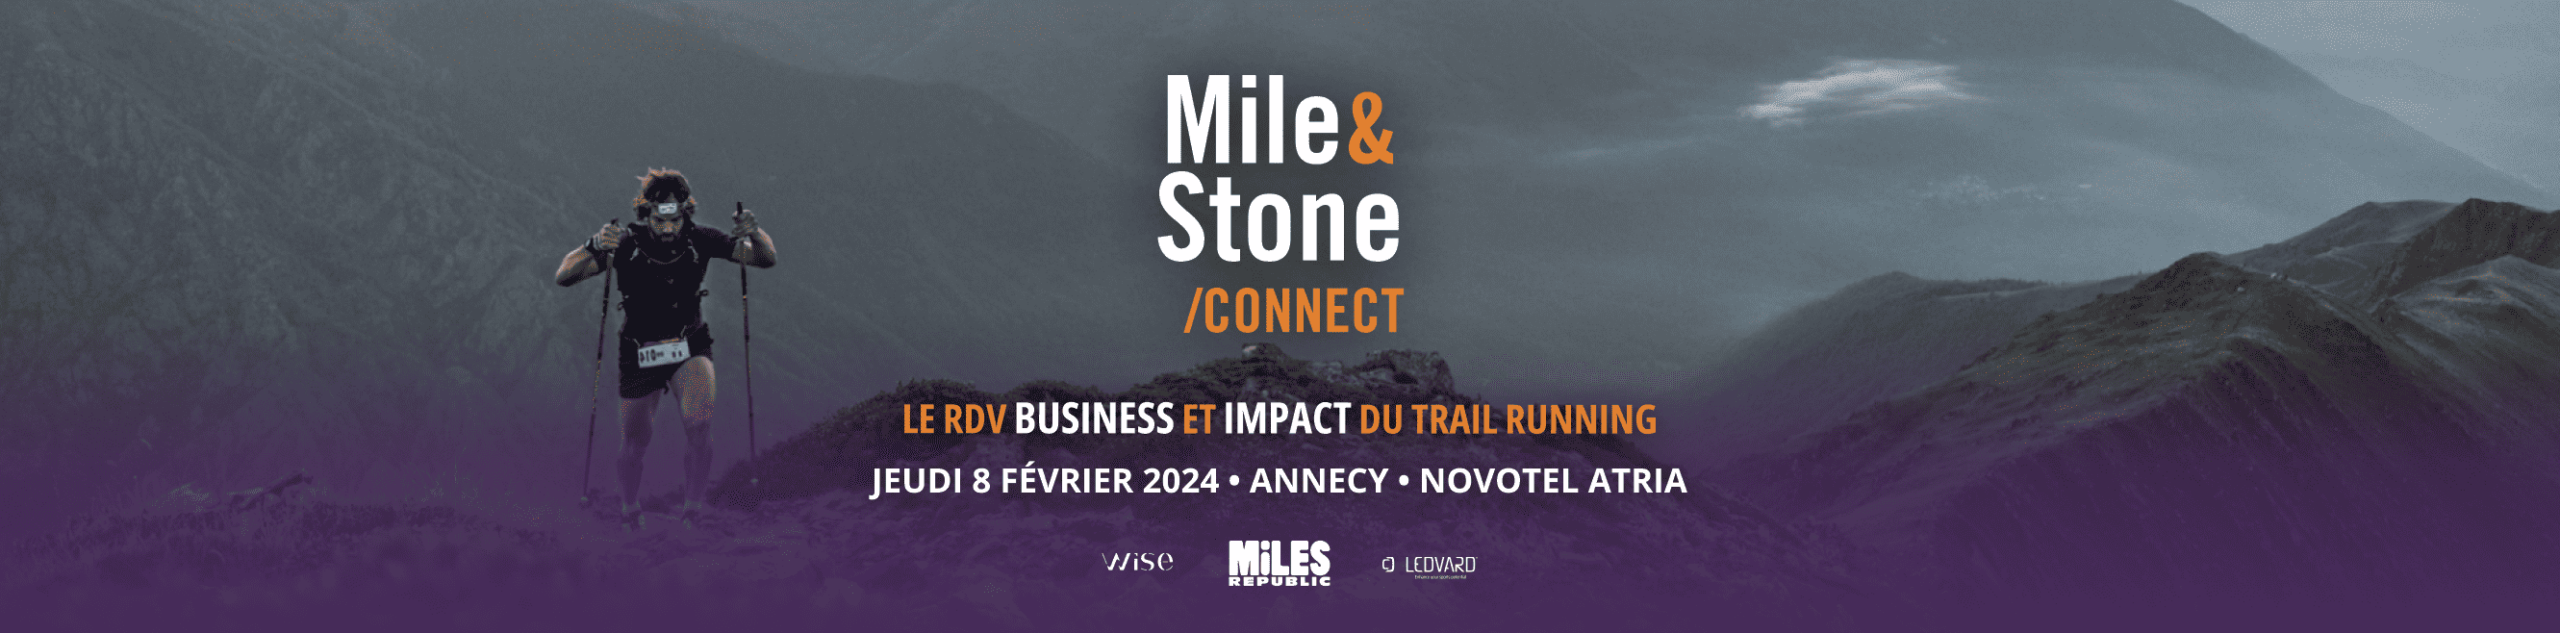 Mile & Stone Connect